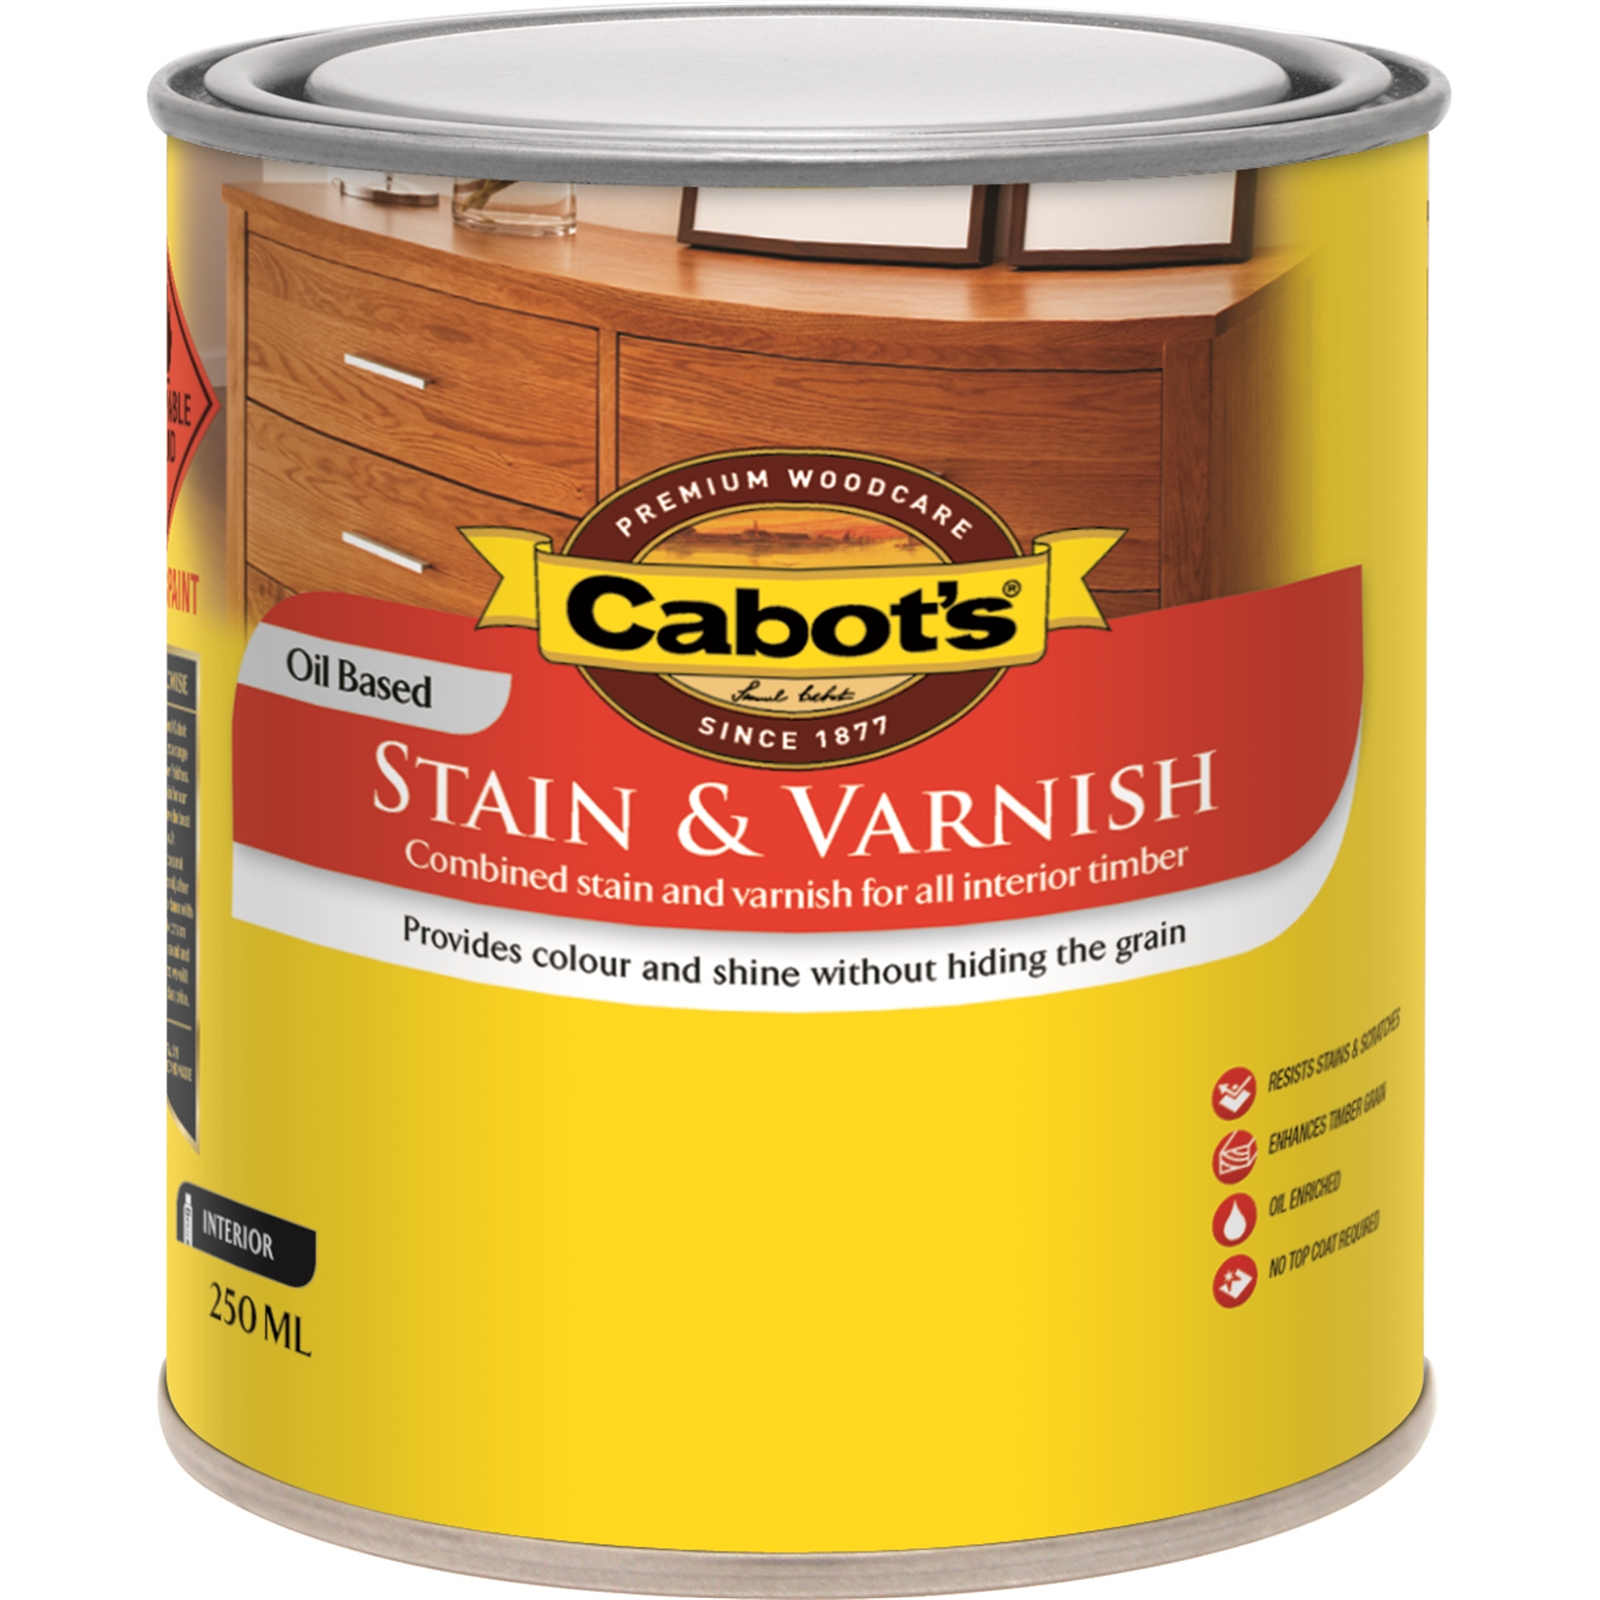 Cabot's 250ml Gloss Oil Based Maple Stain and Varnish